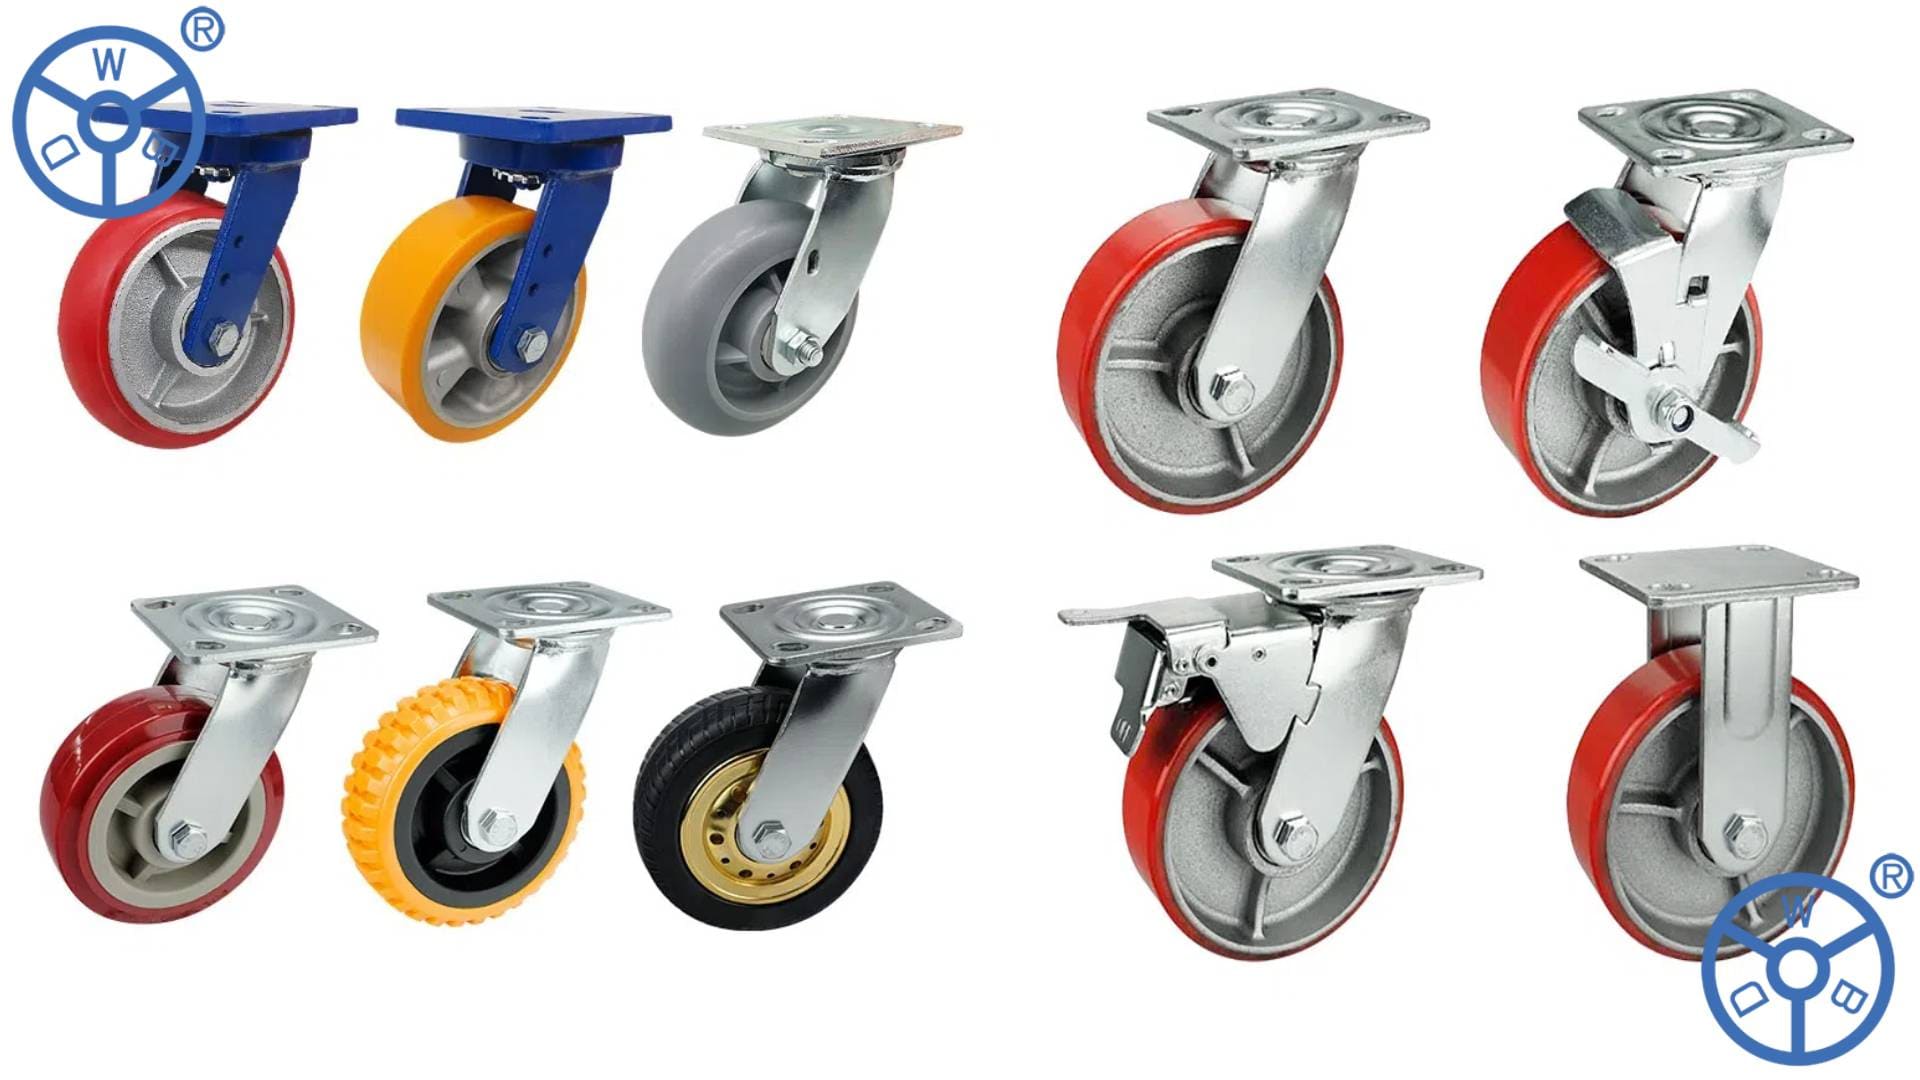 Important Features You Need To Know About Heavy-Duty Casters 